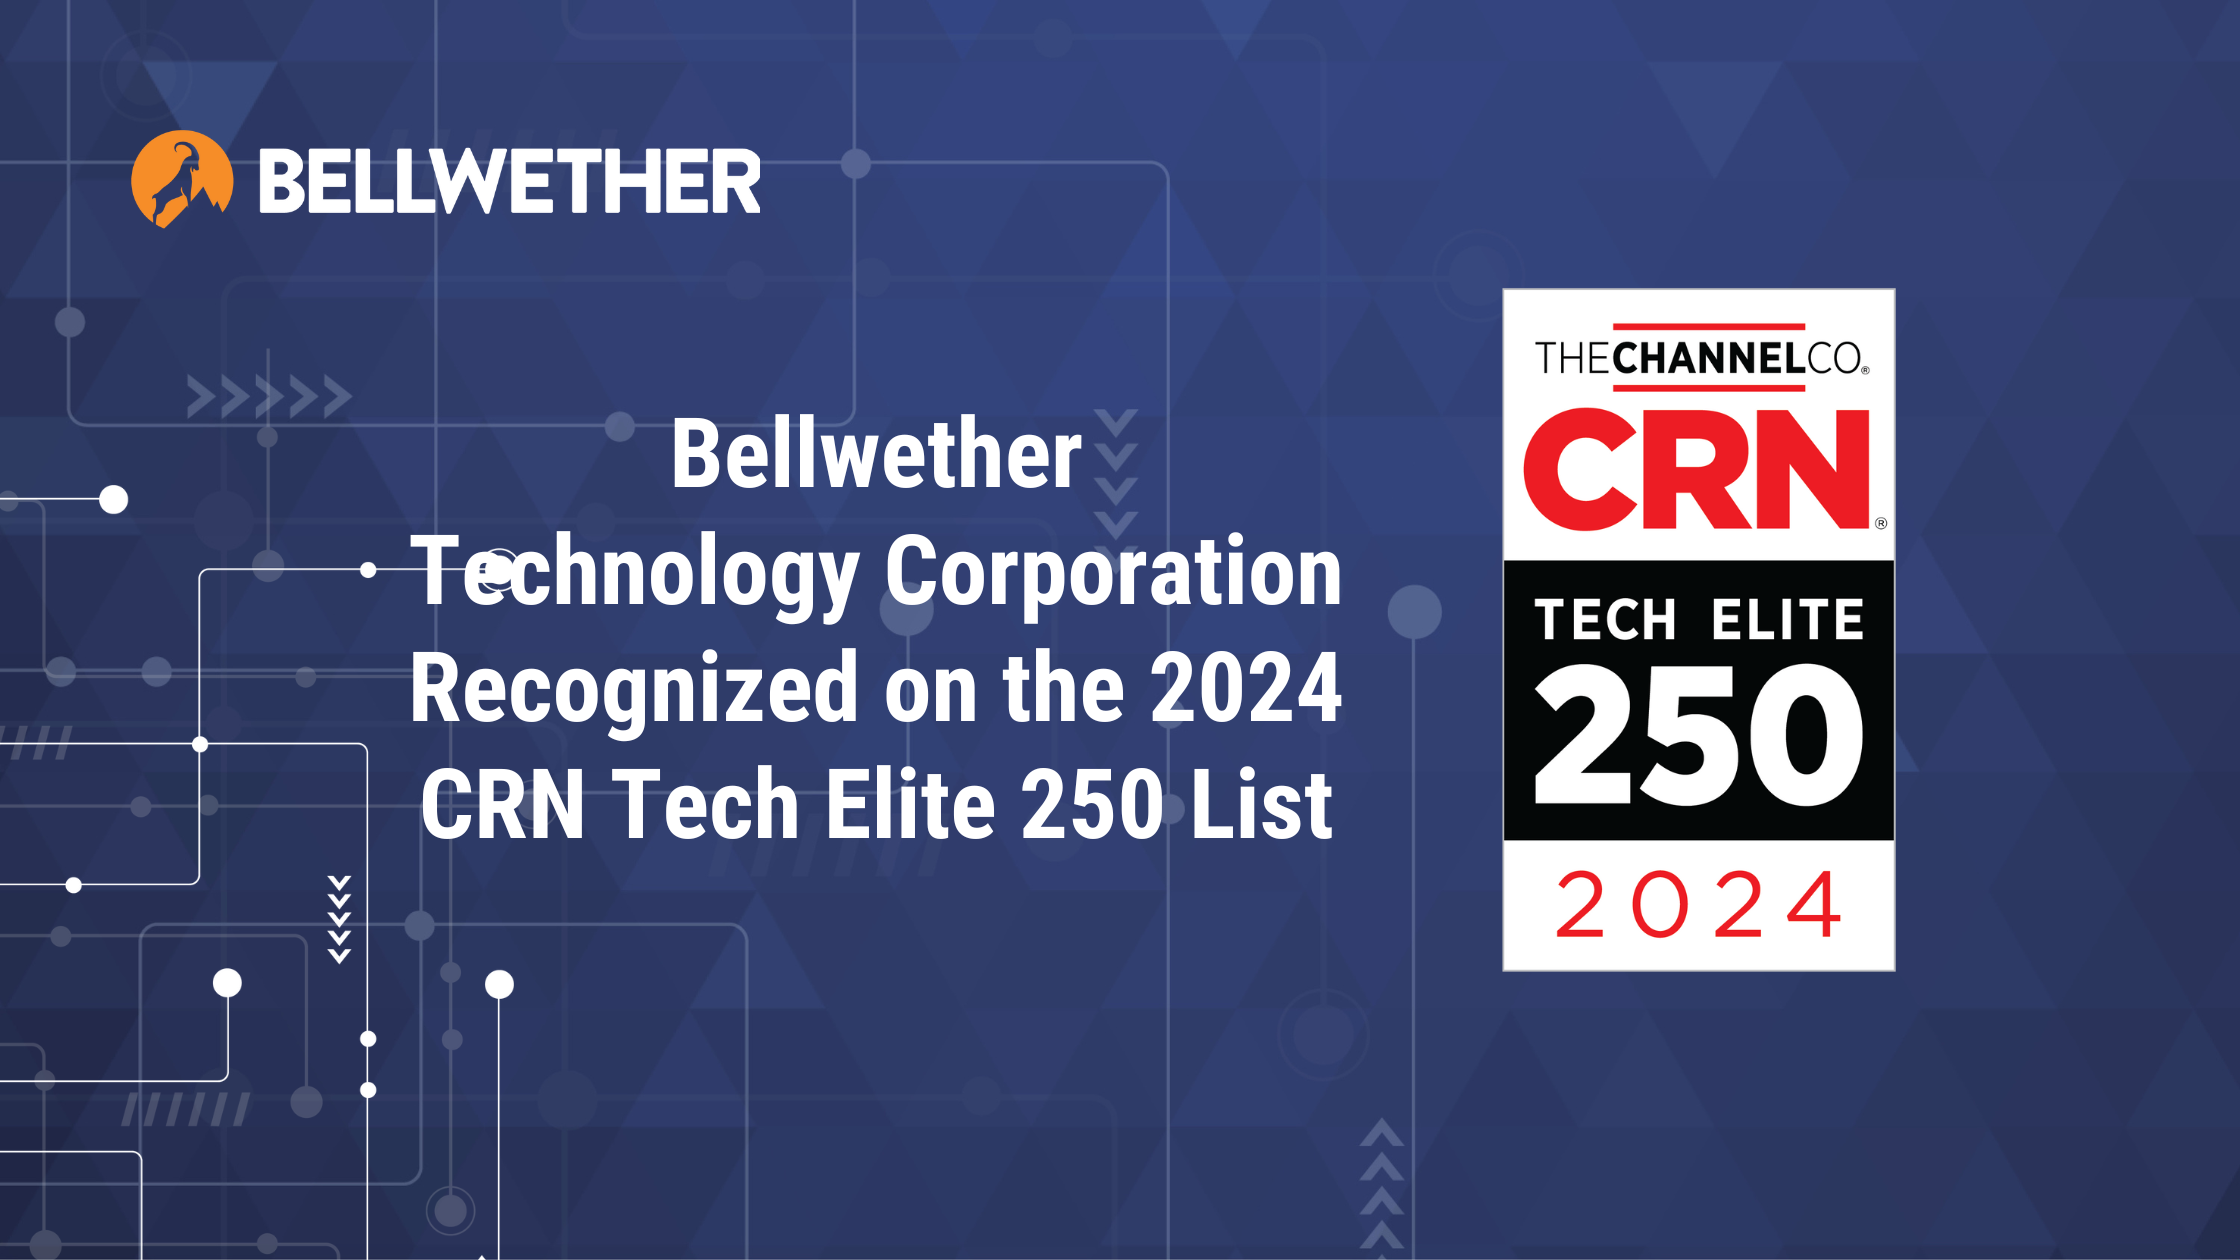 Bellwether Technology Corporation Recognized on the 2024 Tech Elite 250 List